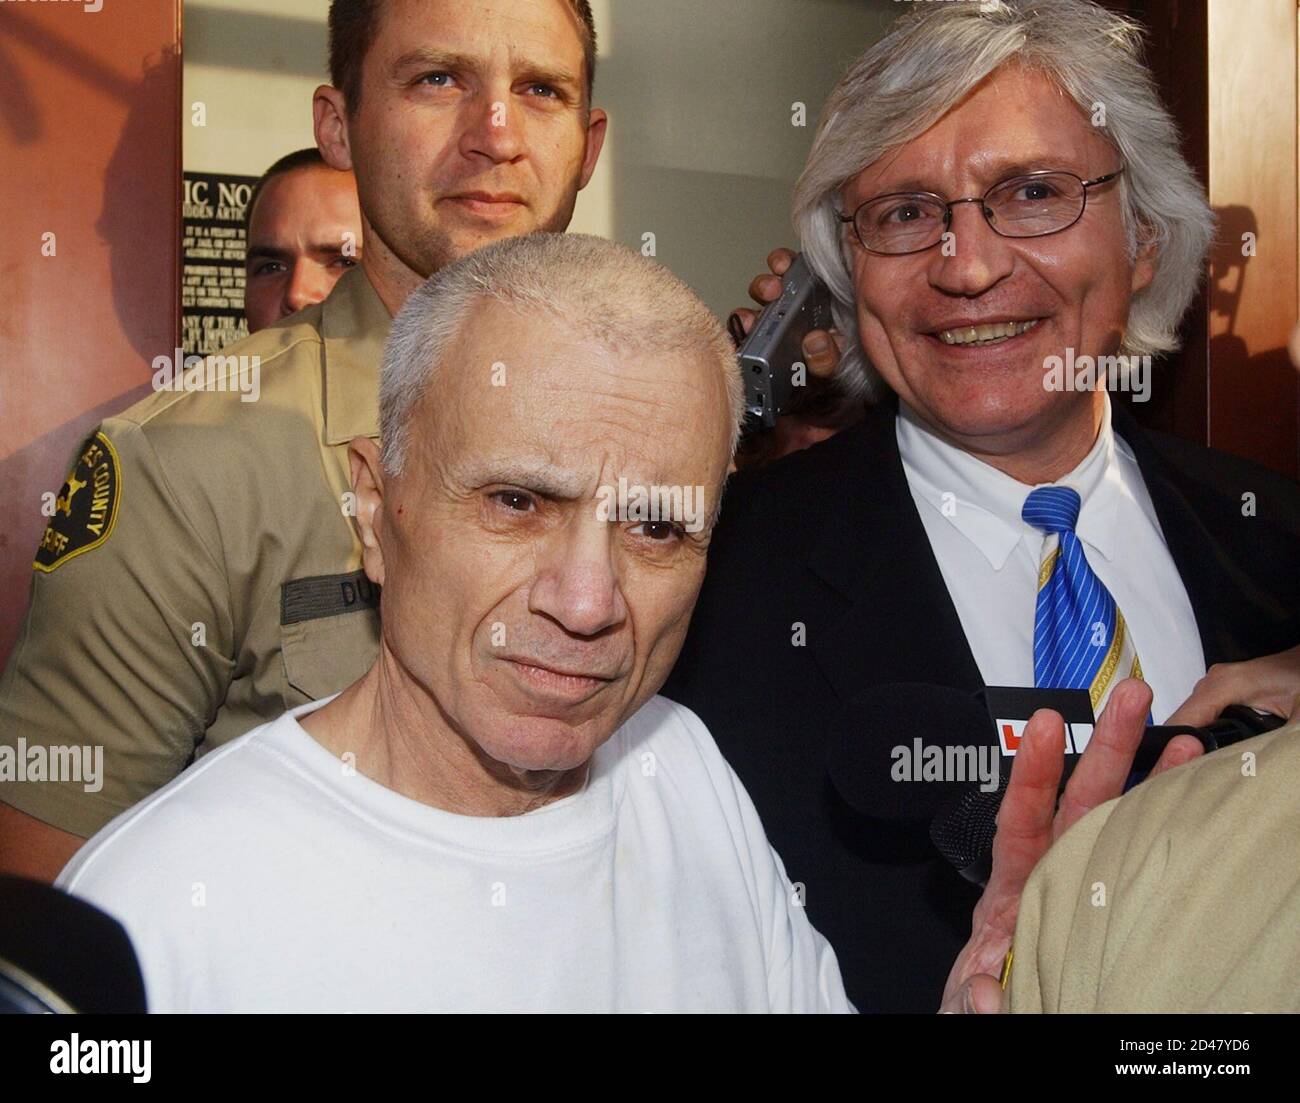 Actor and murder defendant Robert Blake (L) is released from the Los  Angeles men's central jail, March 14, 2003, pending trial at an  undetermined date for the shooting death of his wife.